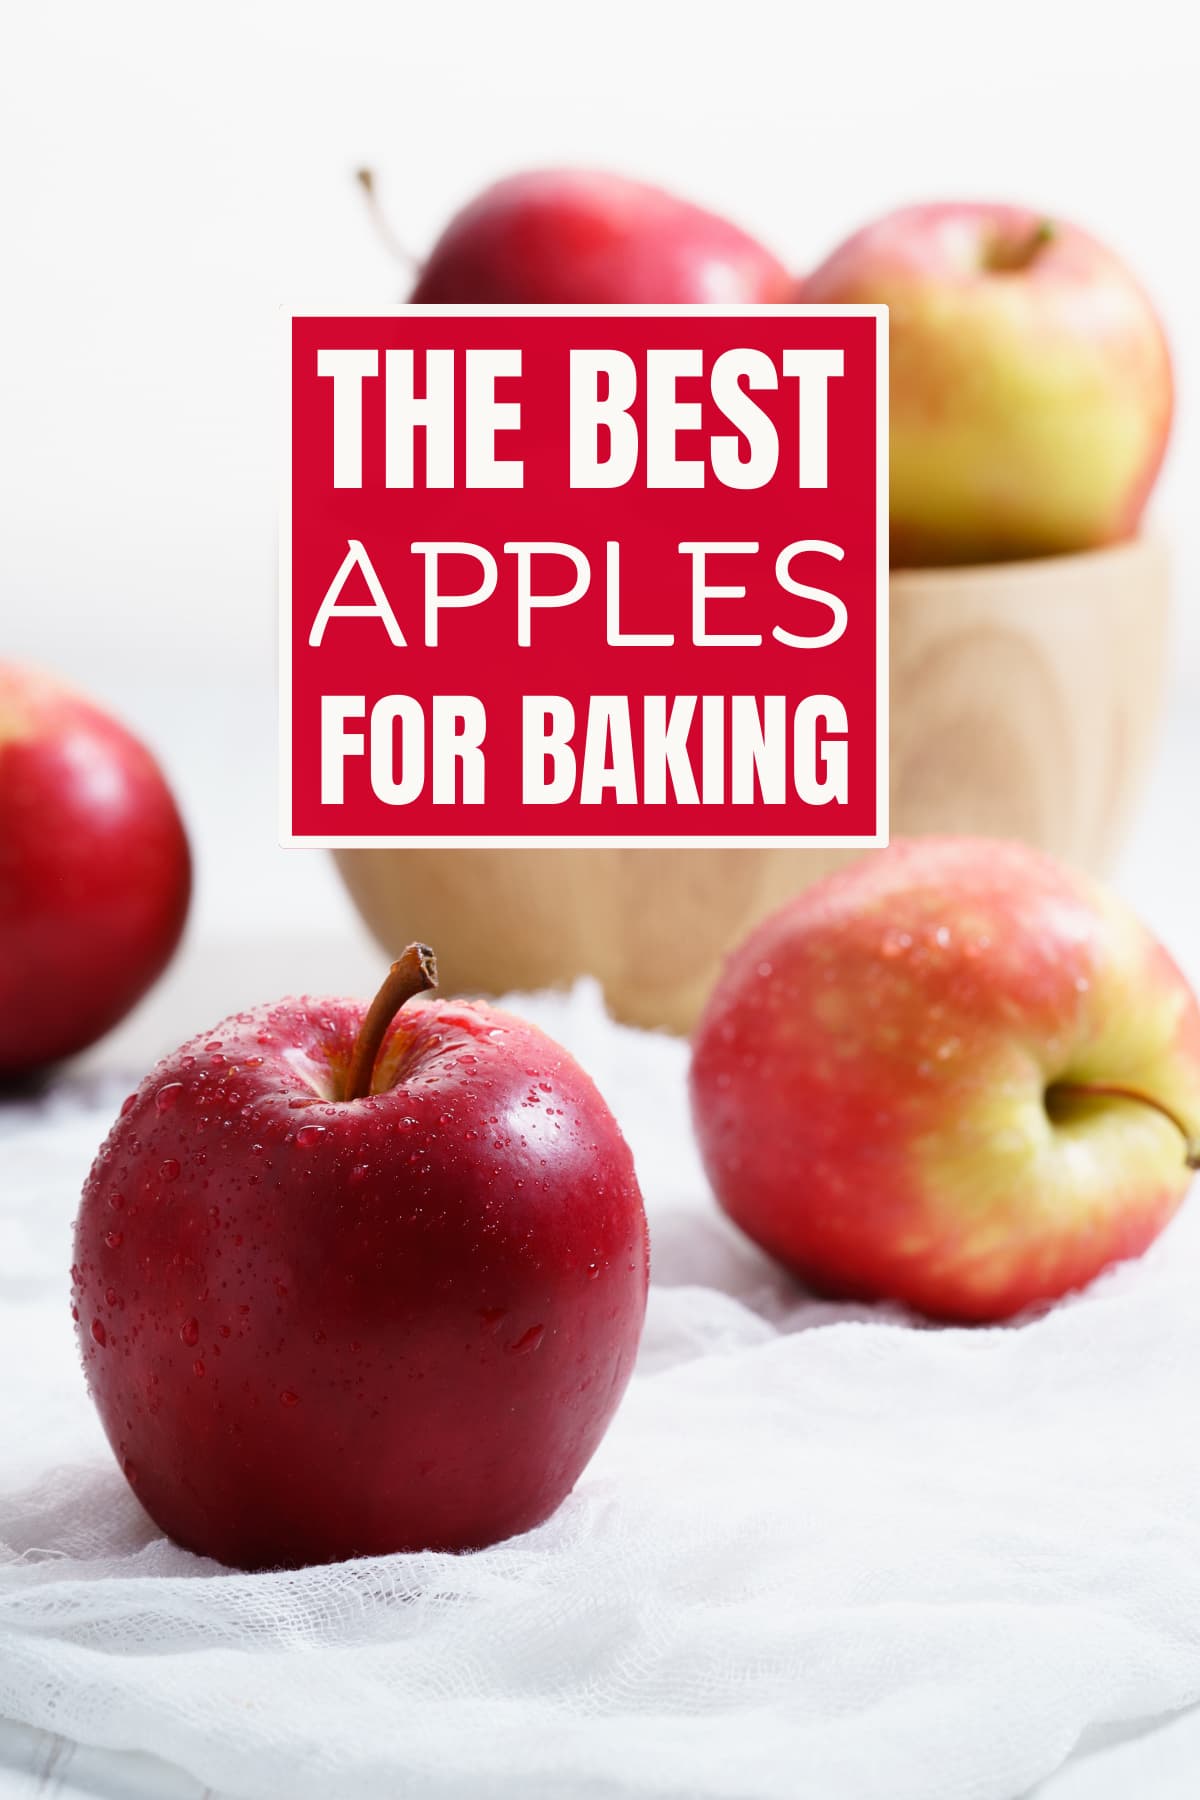 A basket of the best apples for baking with text overlay.